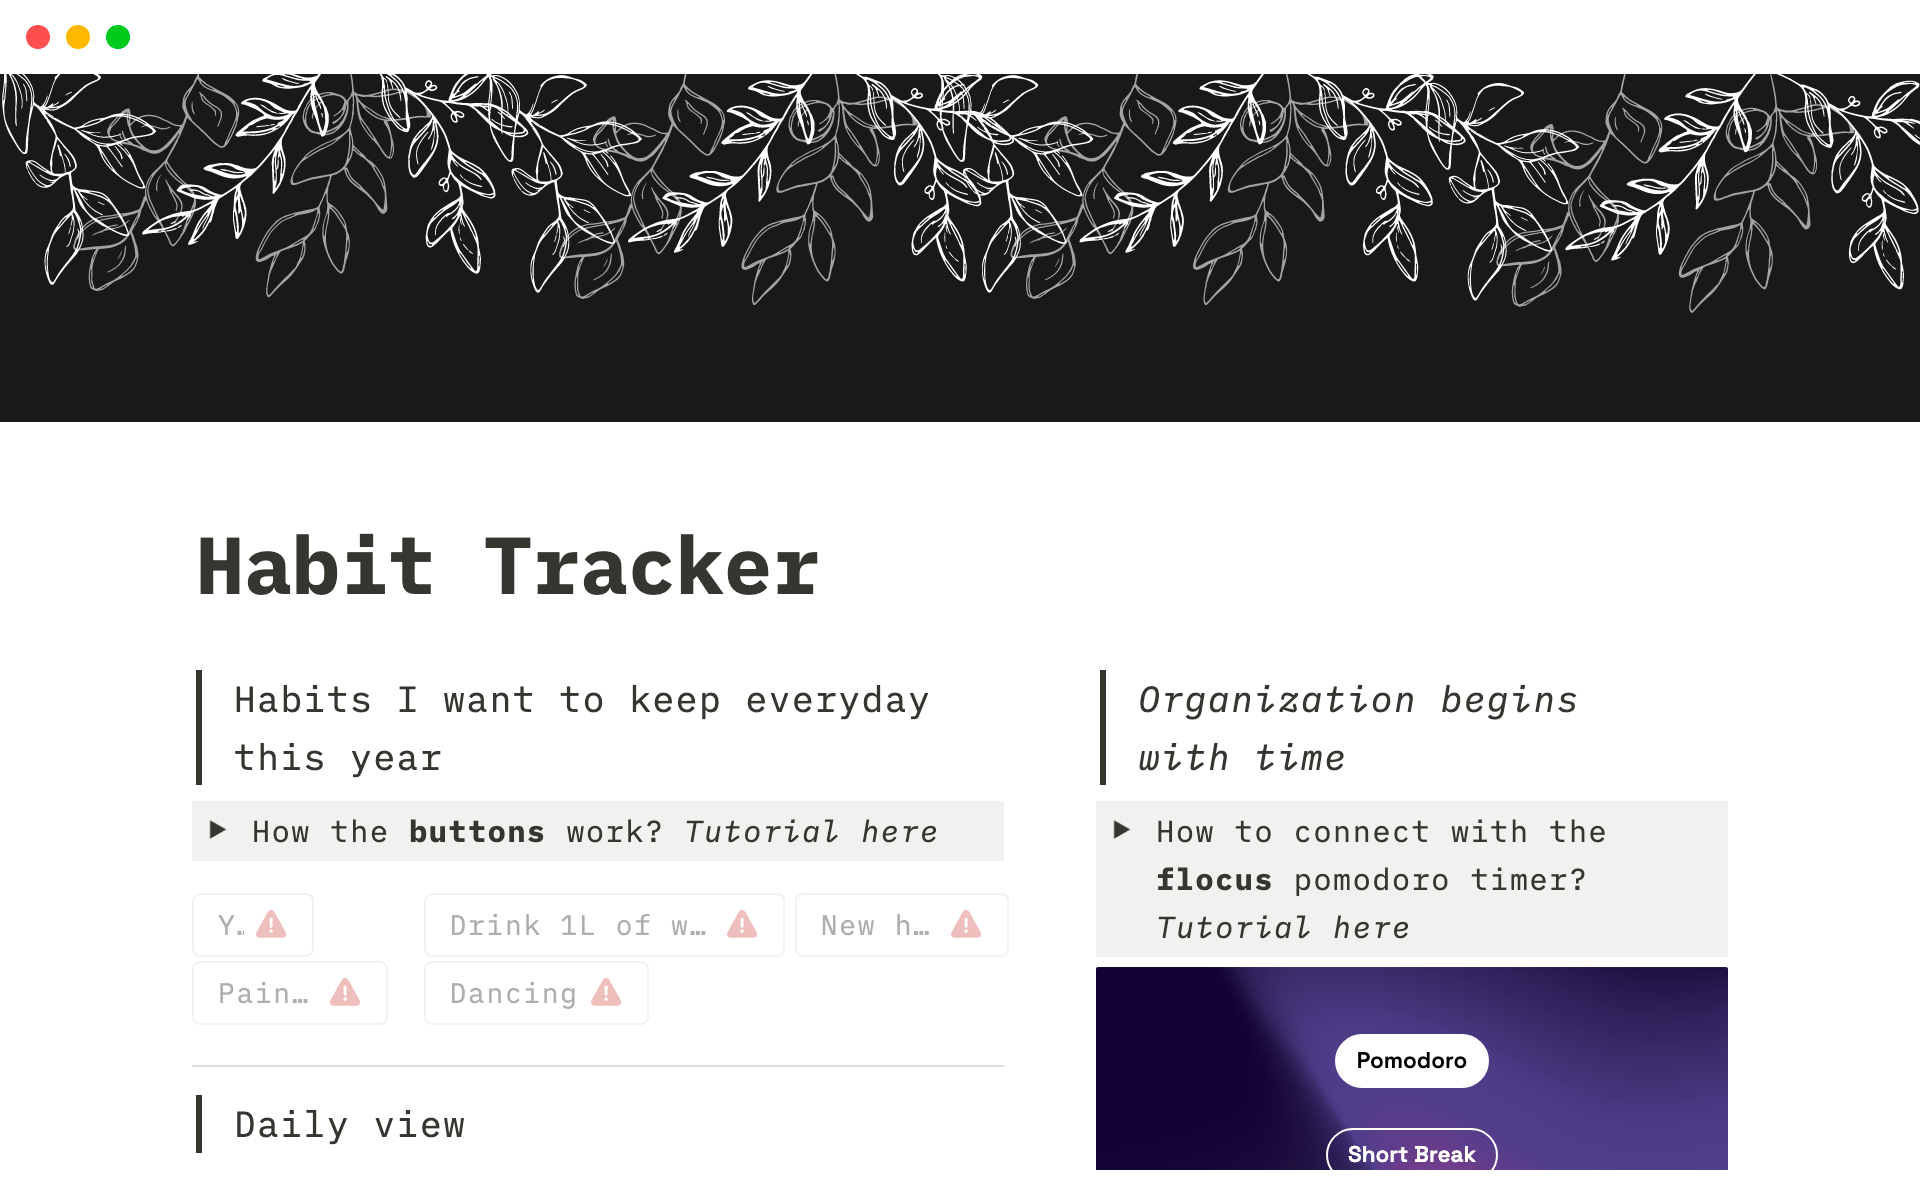 This habit tracker template is user-friendly and includes buttons to quickly mark completed habits in your daily view.